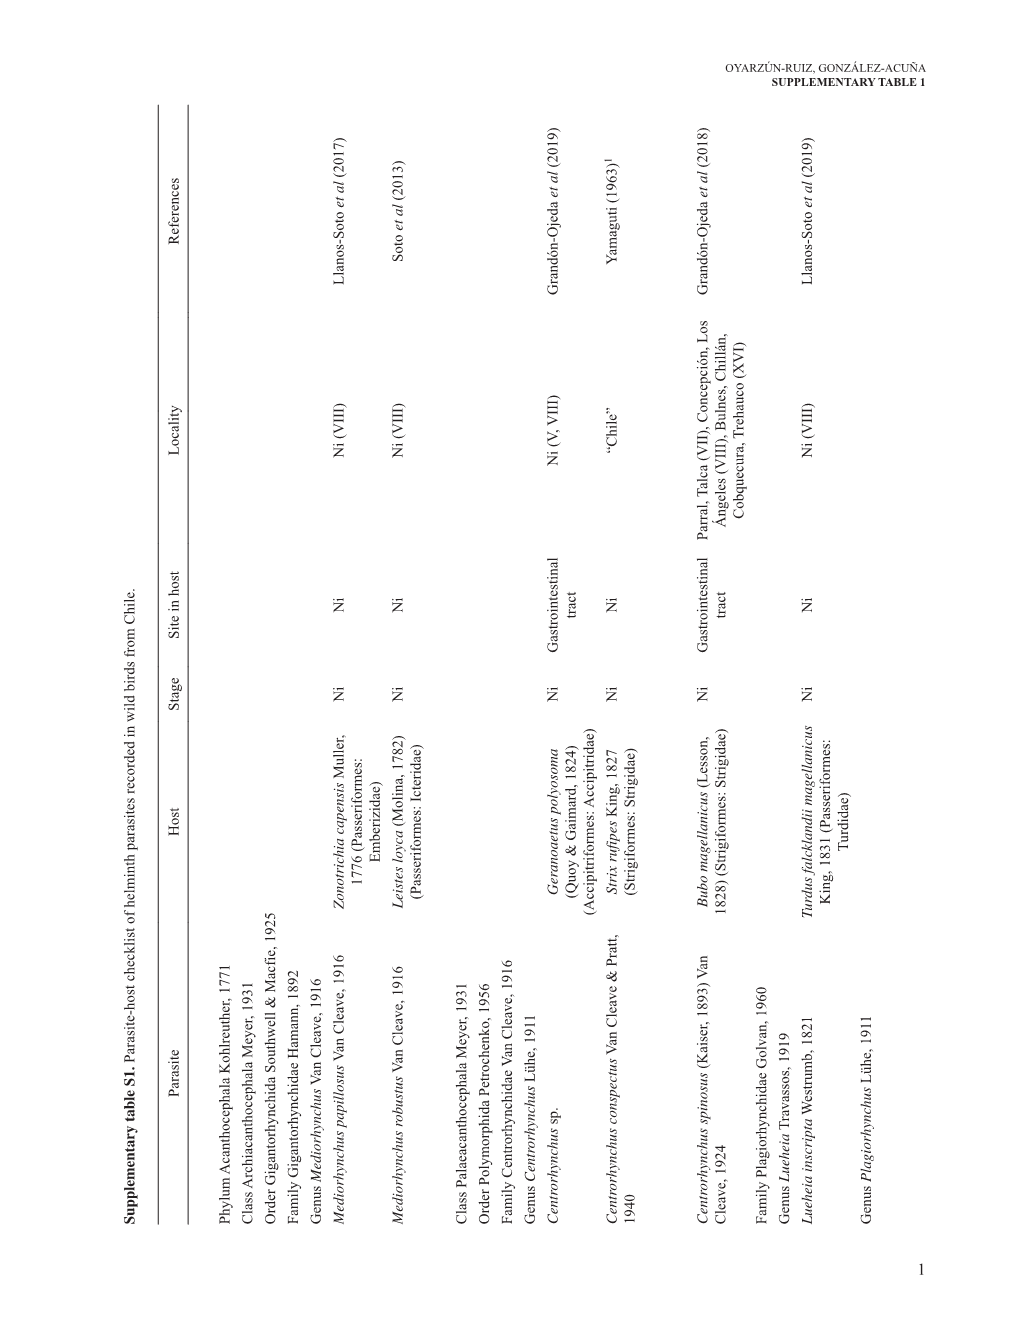 Supplementary Table S1. Parasite-Host Checklist of Helminth